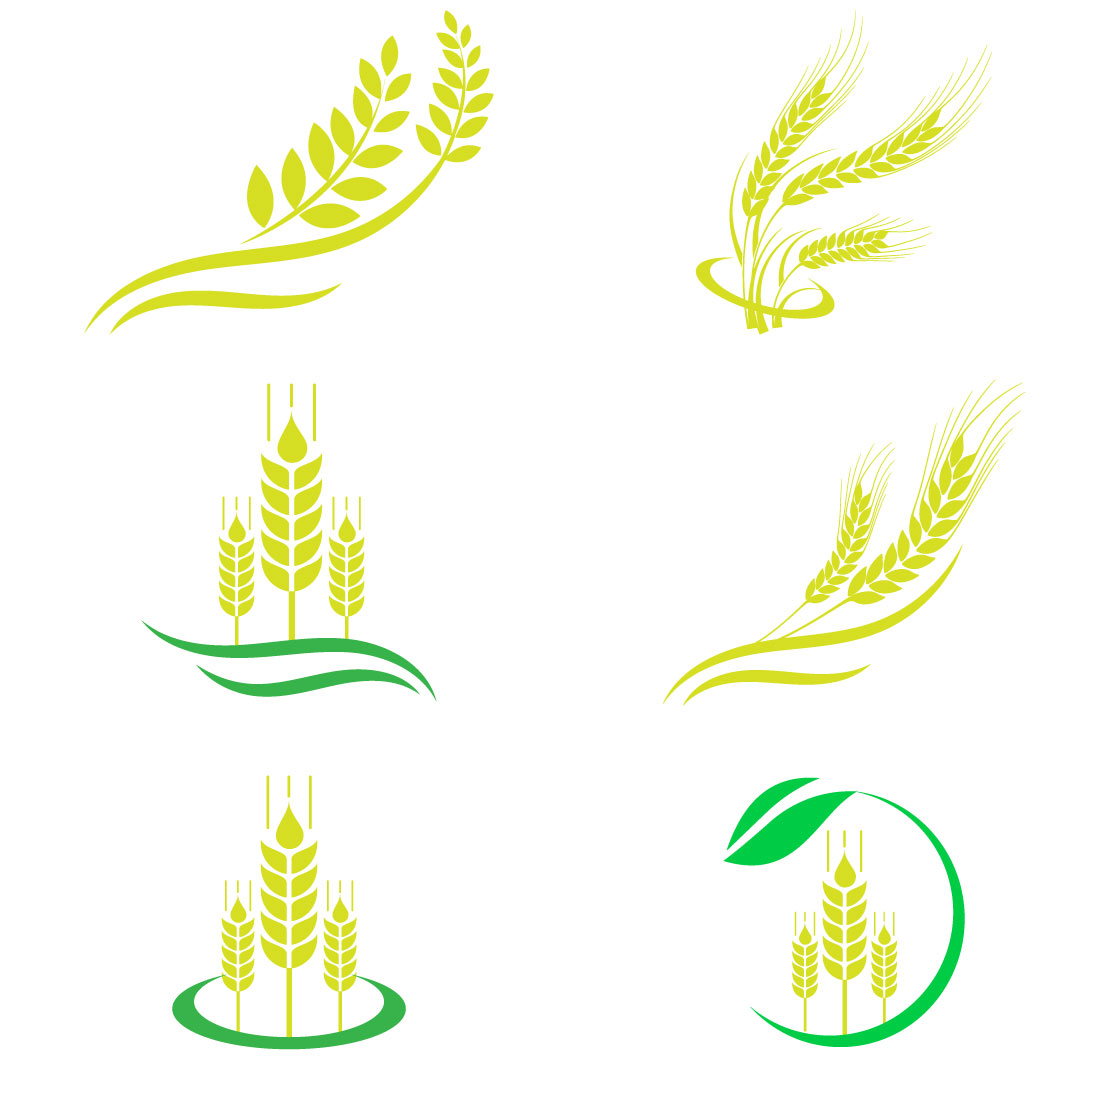 Wheat Ears Icon and Logo Set cover image.